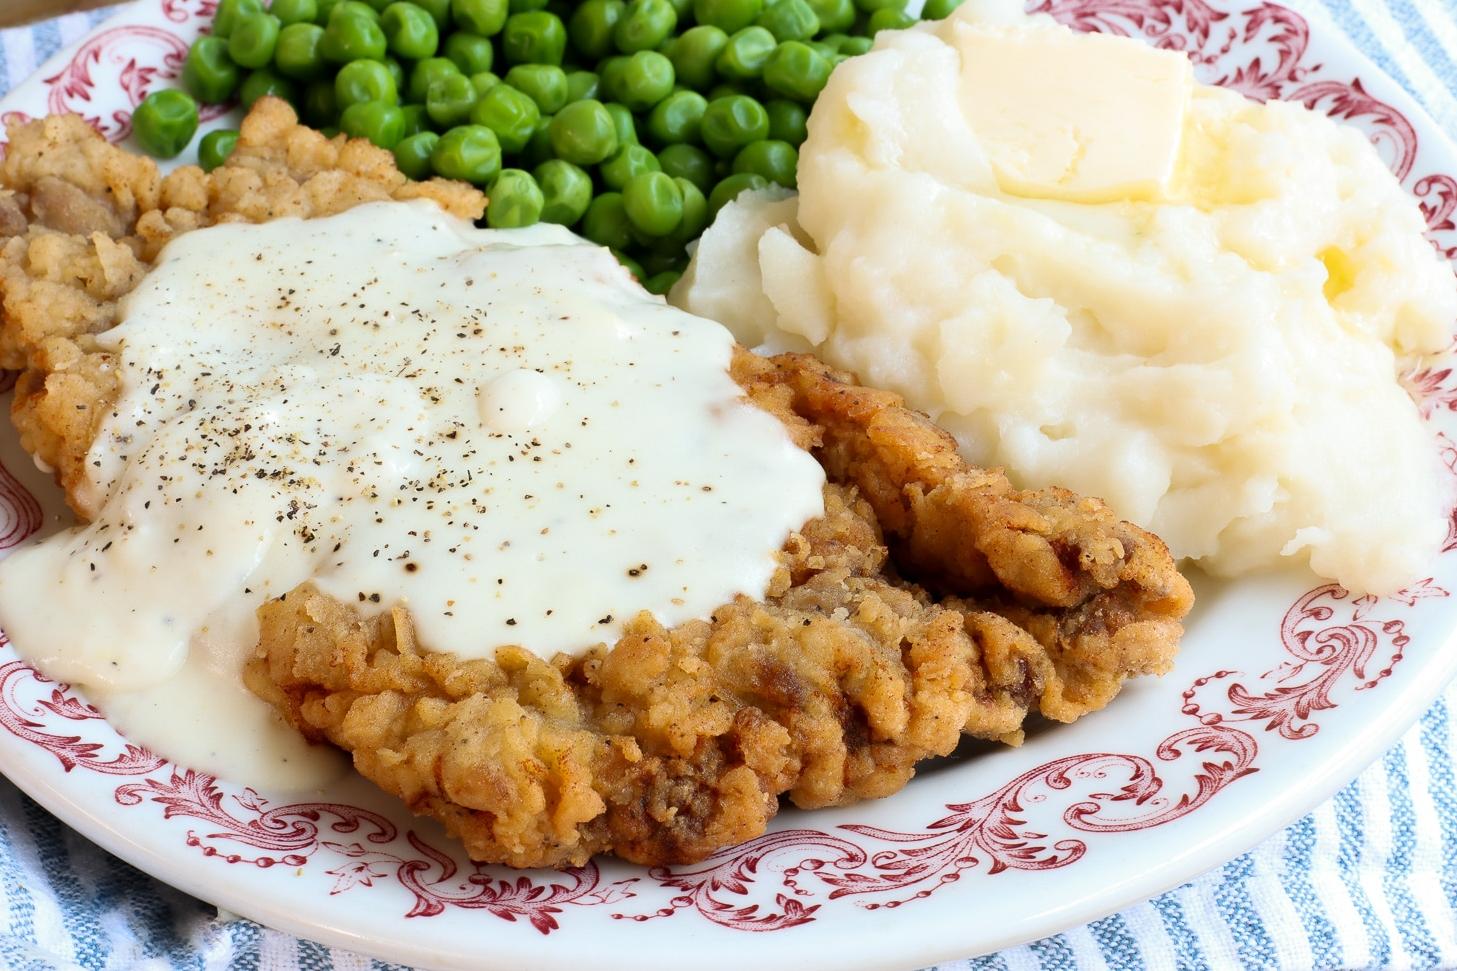  A sizzling hot plate of crispy and tender chicken-fried steak ready to be devoured!